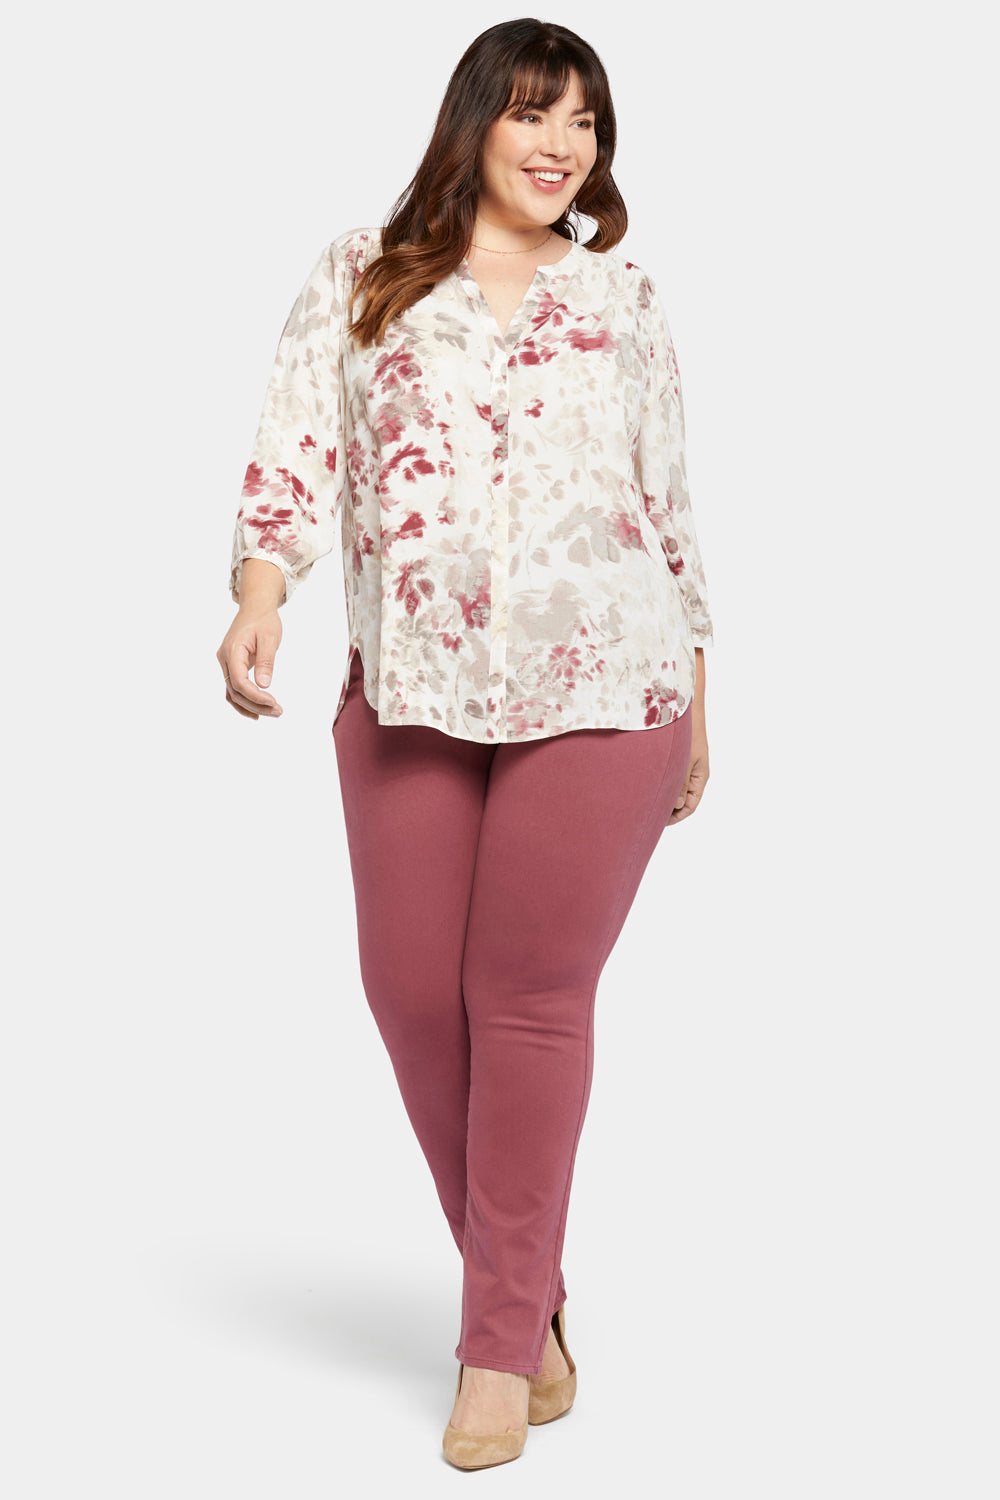 NYDJ Pintuck Blouse In Plus Size  - Westhaven